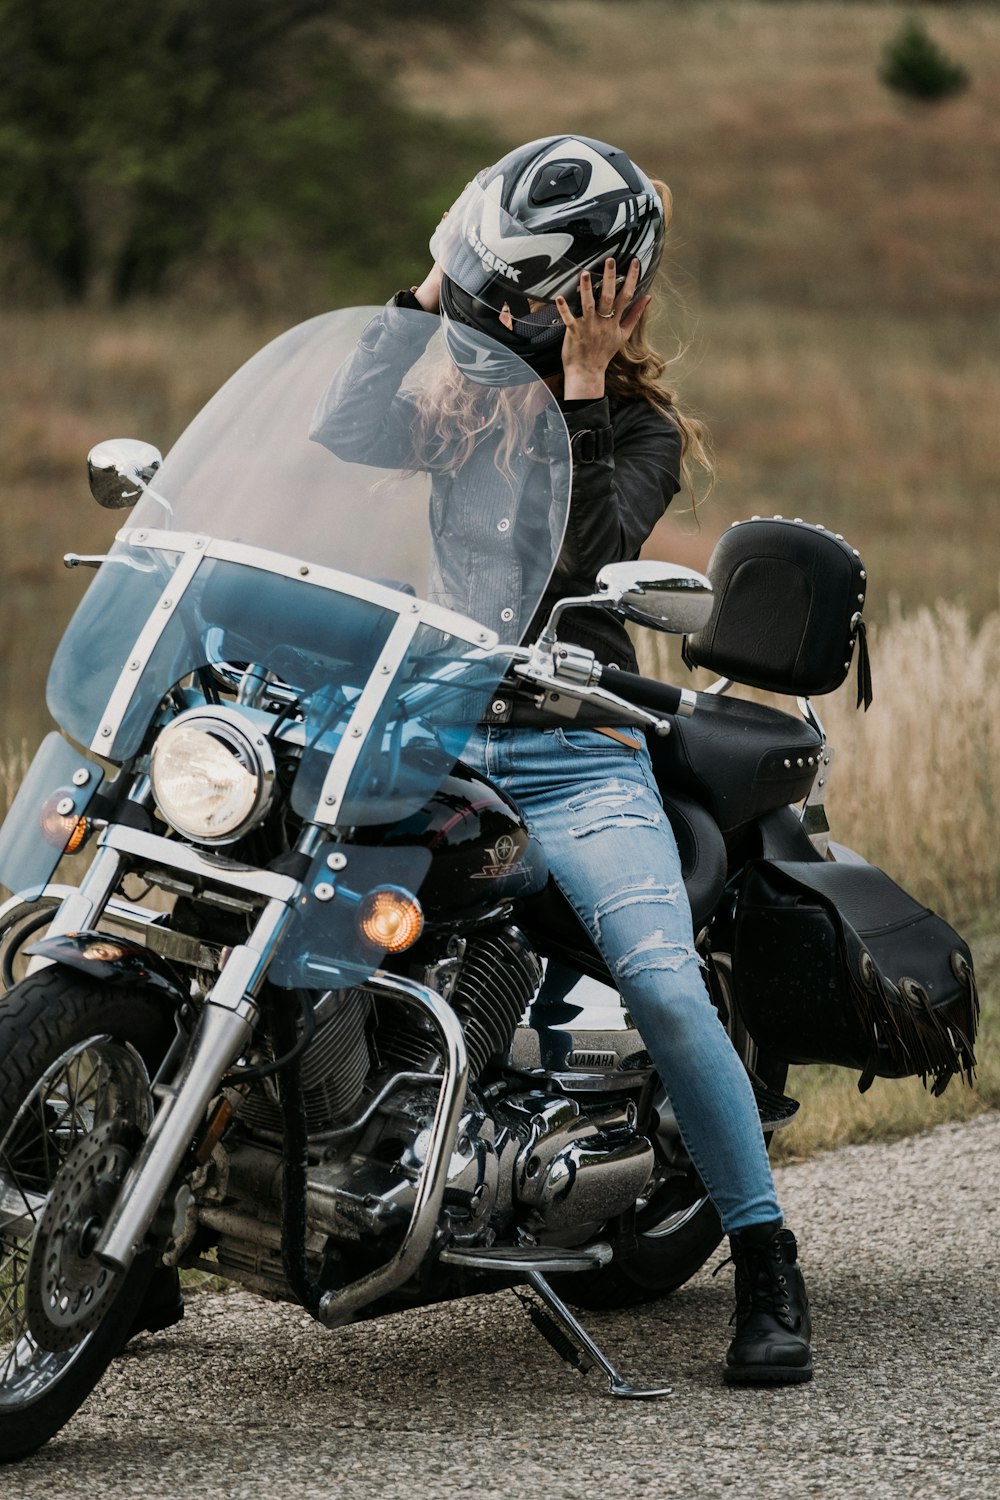 Motorcycle Girl Pictures | Download Free Images on Unsplash